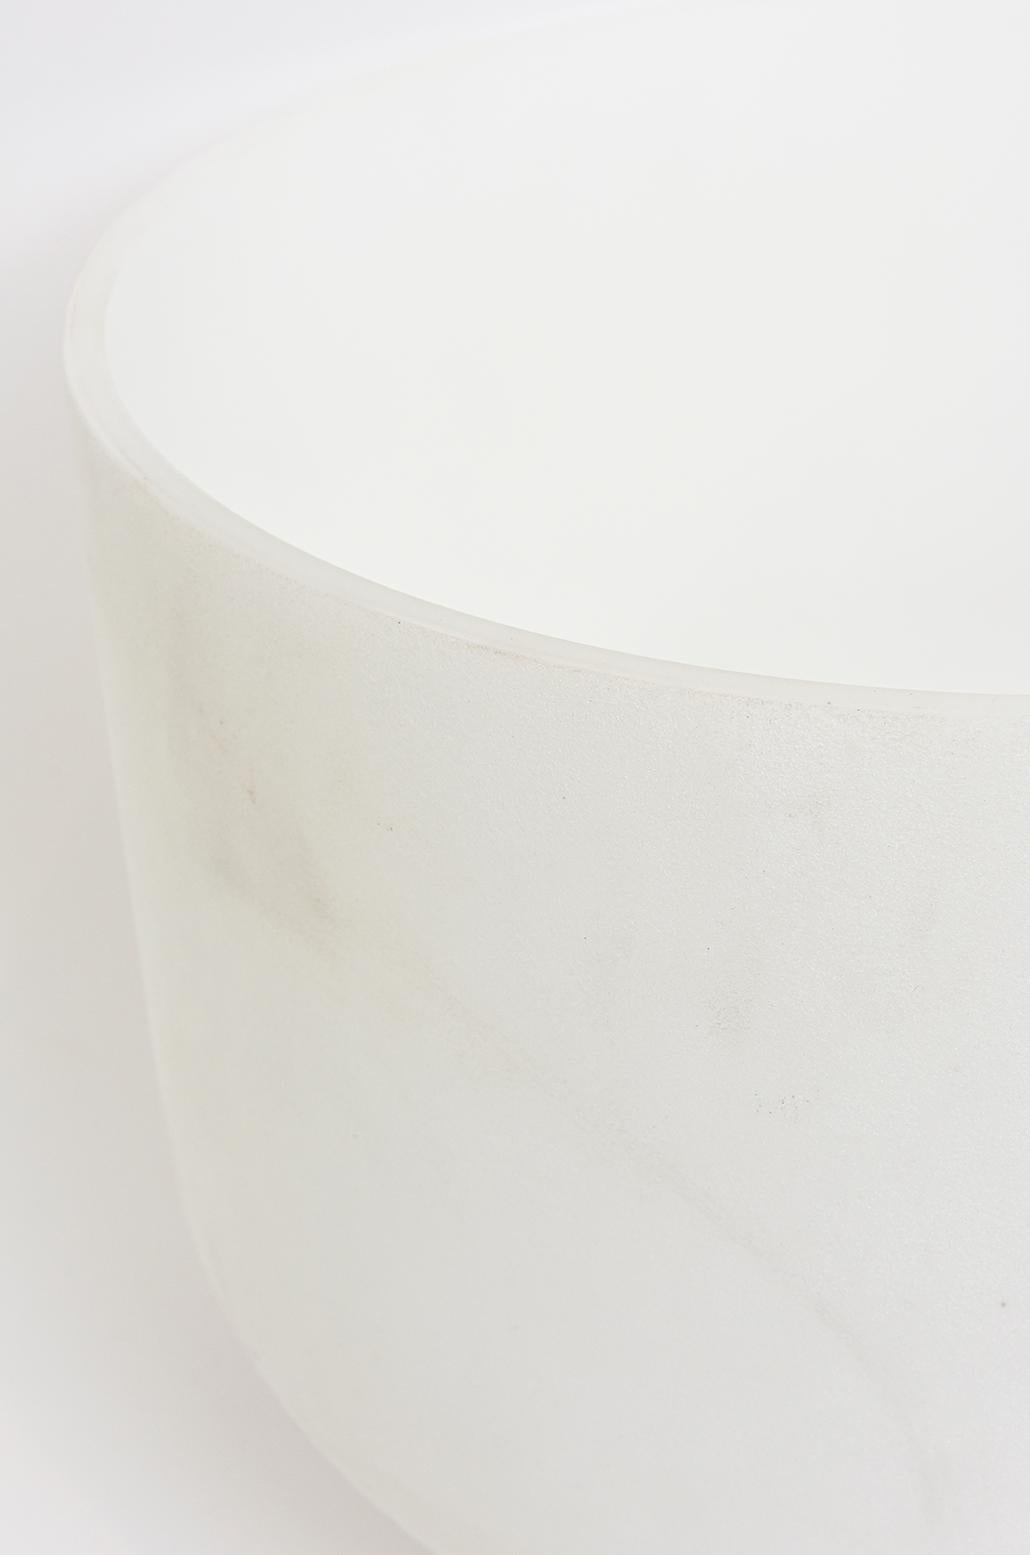 This huge and commanding white acid etched Murano glass Scavo technique bowl is signed Seguso Murano on the bottom. It is almost like frosted glass with acid etched finish. This is a planter for orchids and or flowers. It will take many to fill this